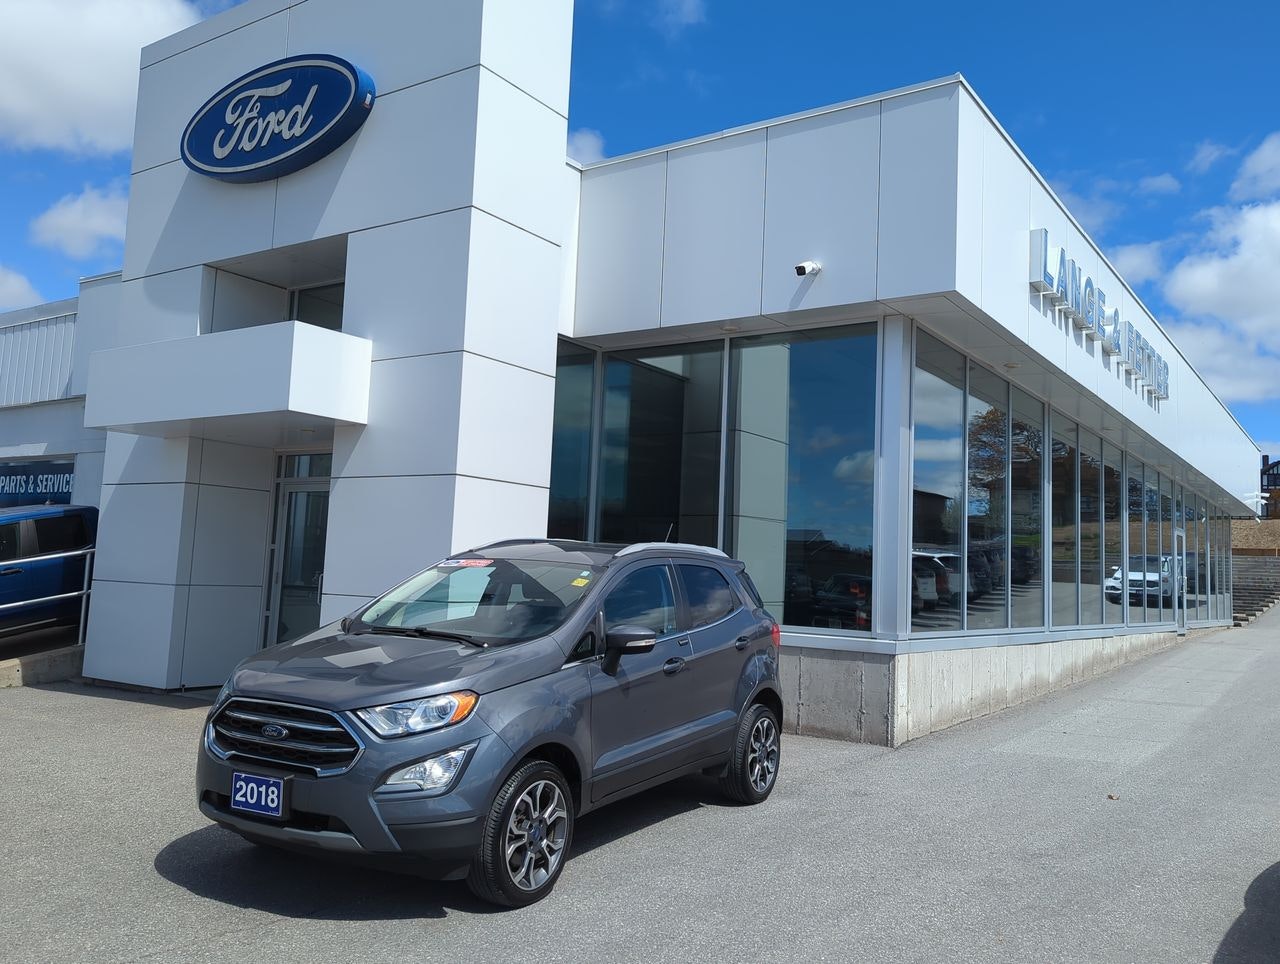 2018 Ford EcoSport - 21683A Full Image 1